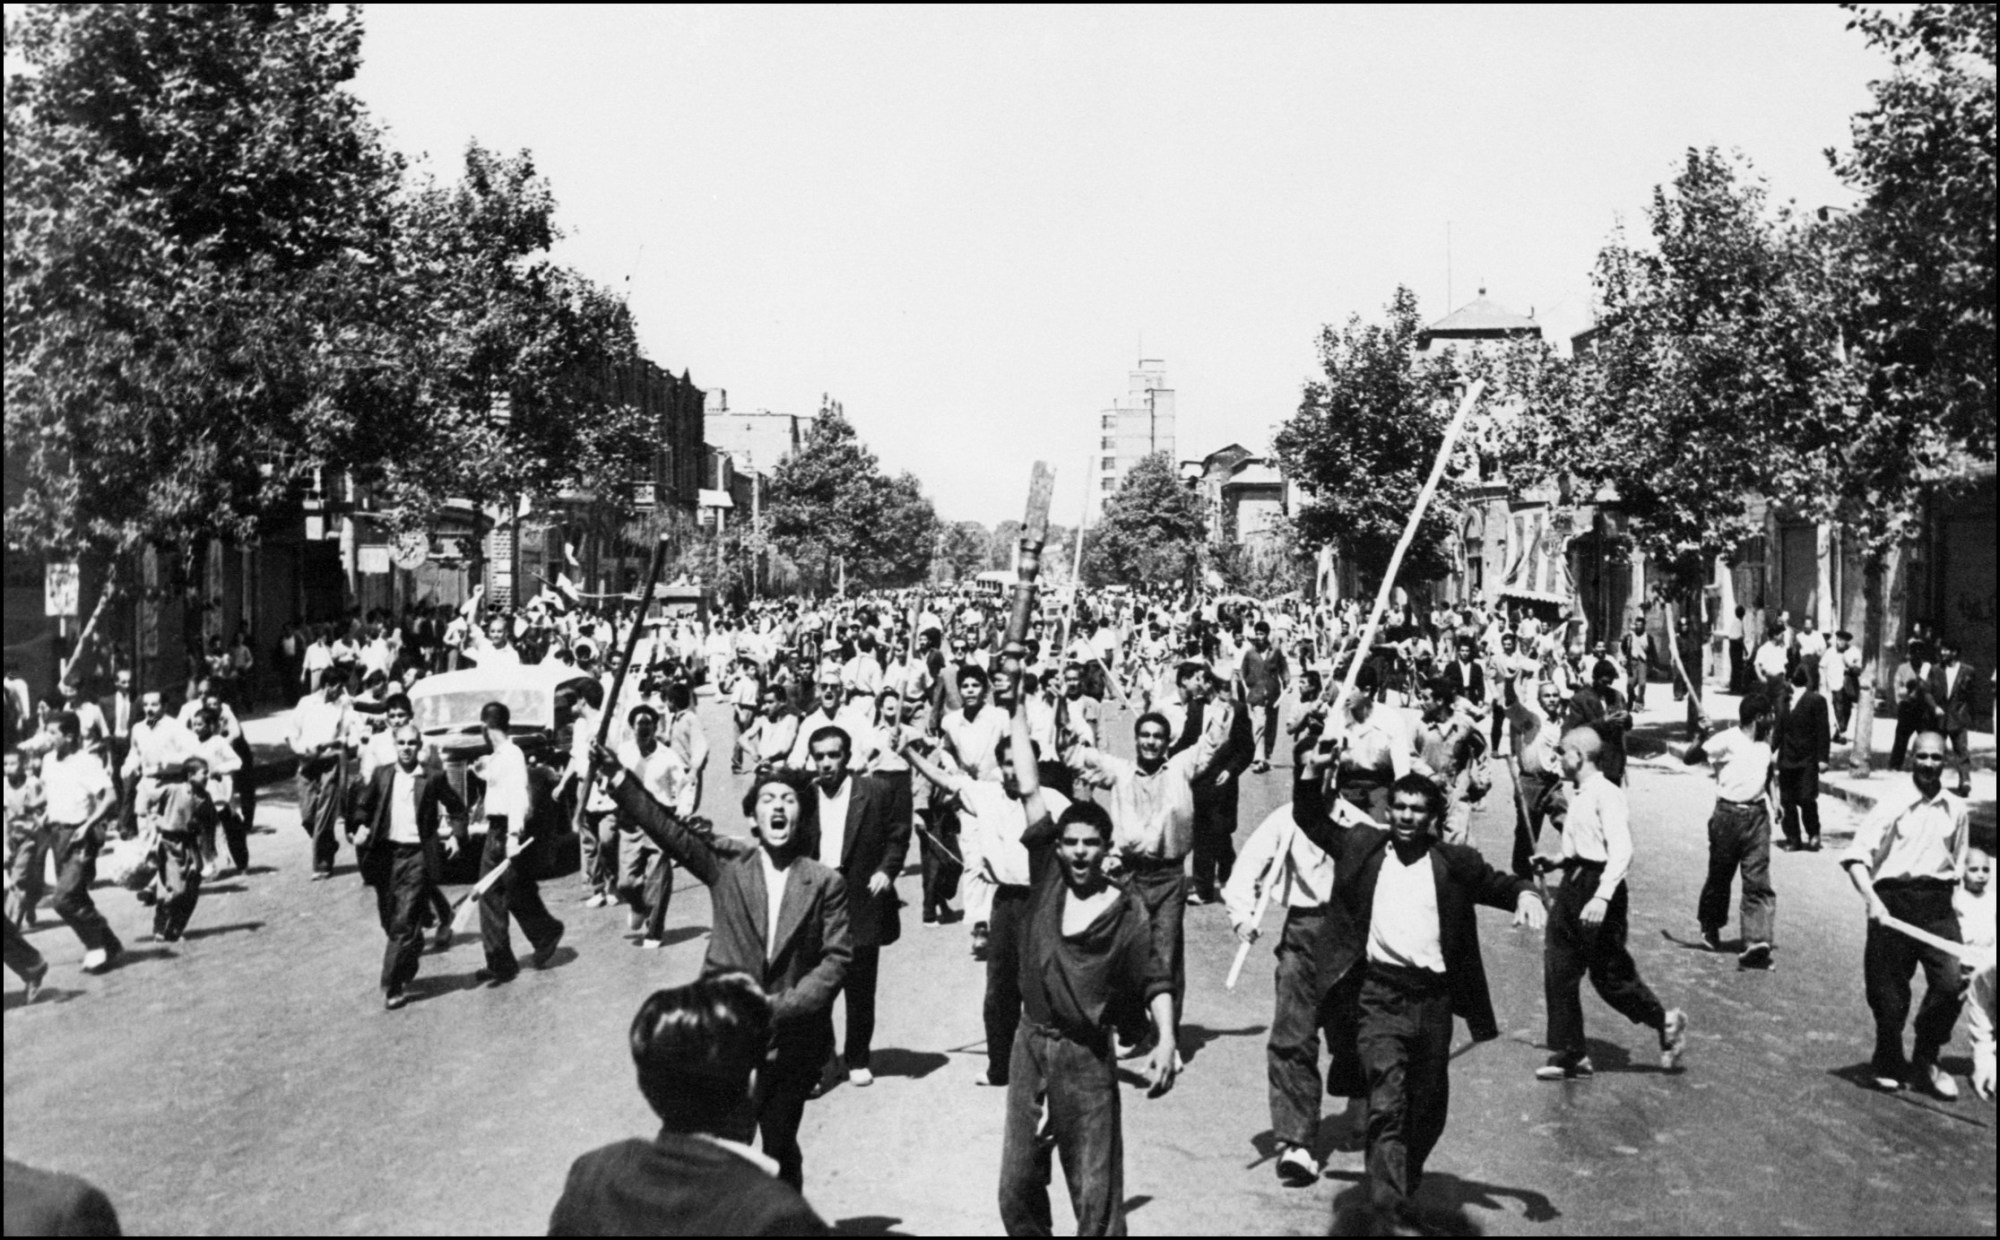 Rioters armed with staves shout slogans, during riots in Tehran, August 1953. Photo by -/INTERCONTINENTALE/AFP via Getty Images